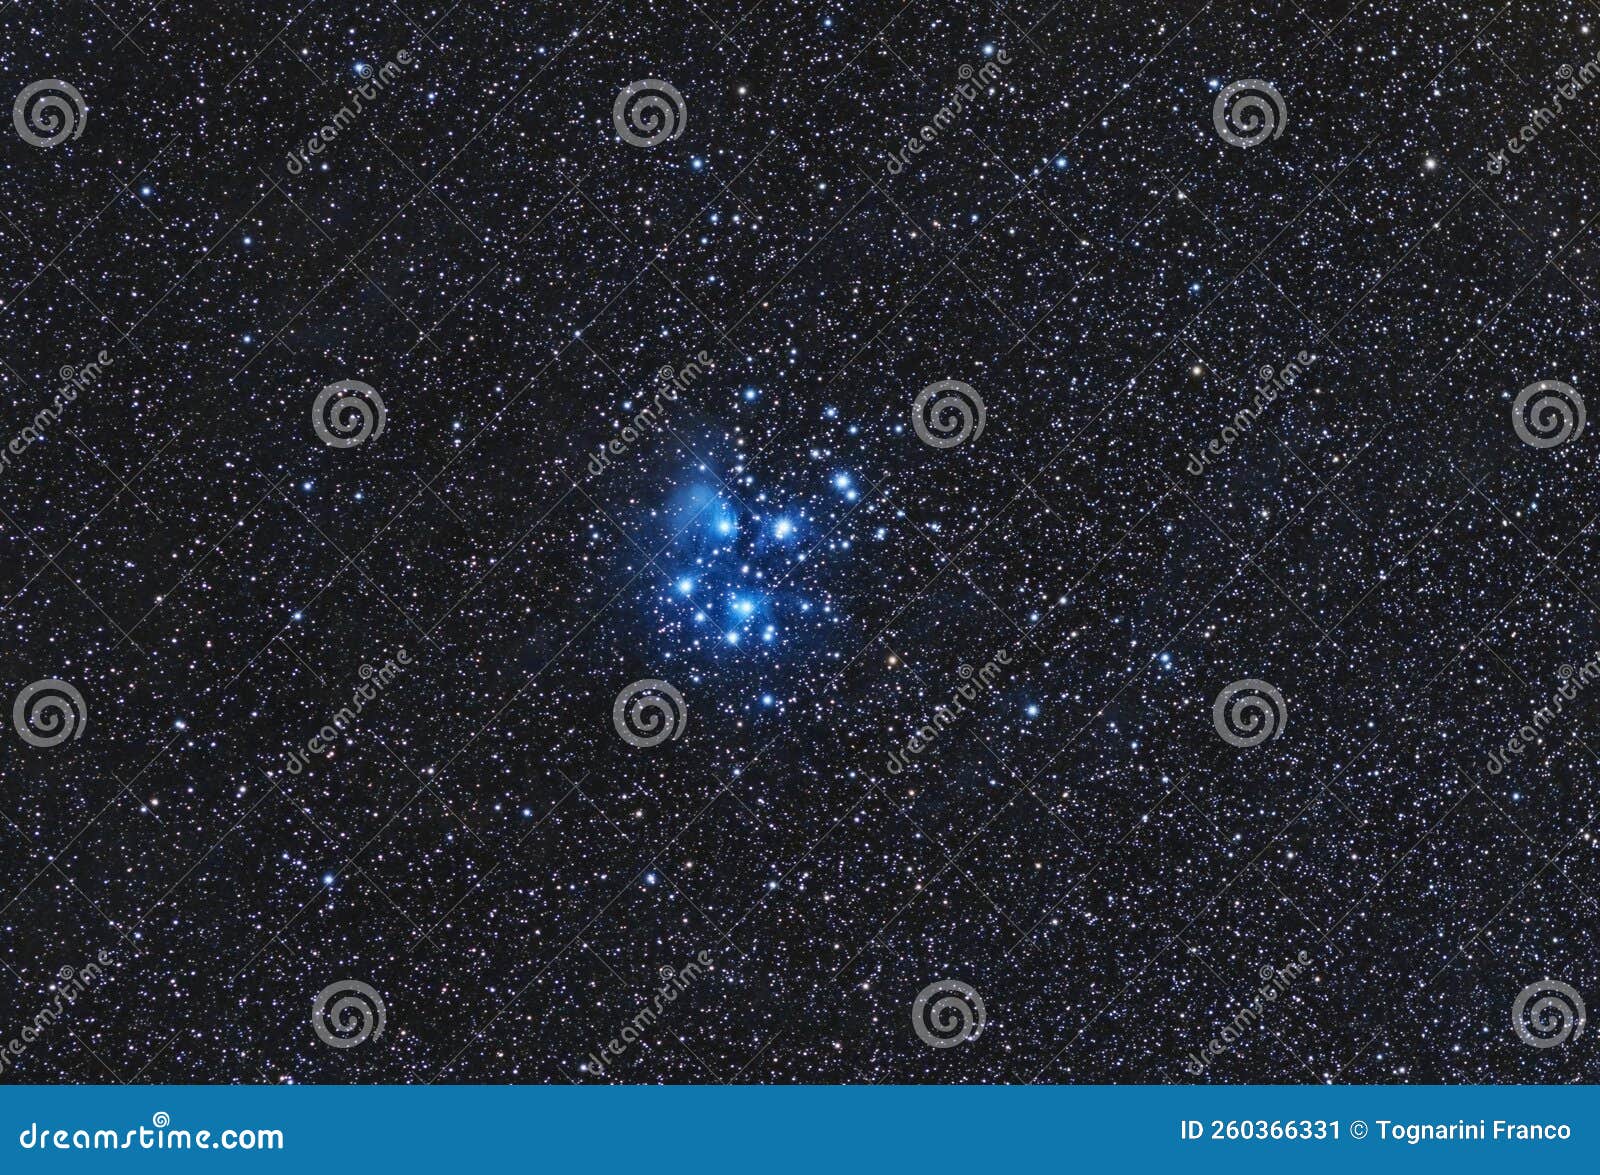 wide field of the pleiades, also known as the seven sisters and messier 45, an open star cluster